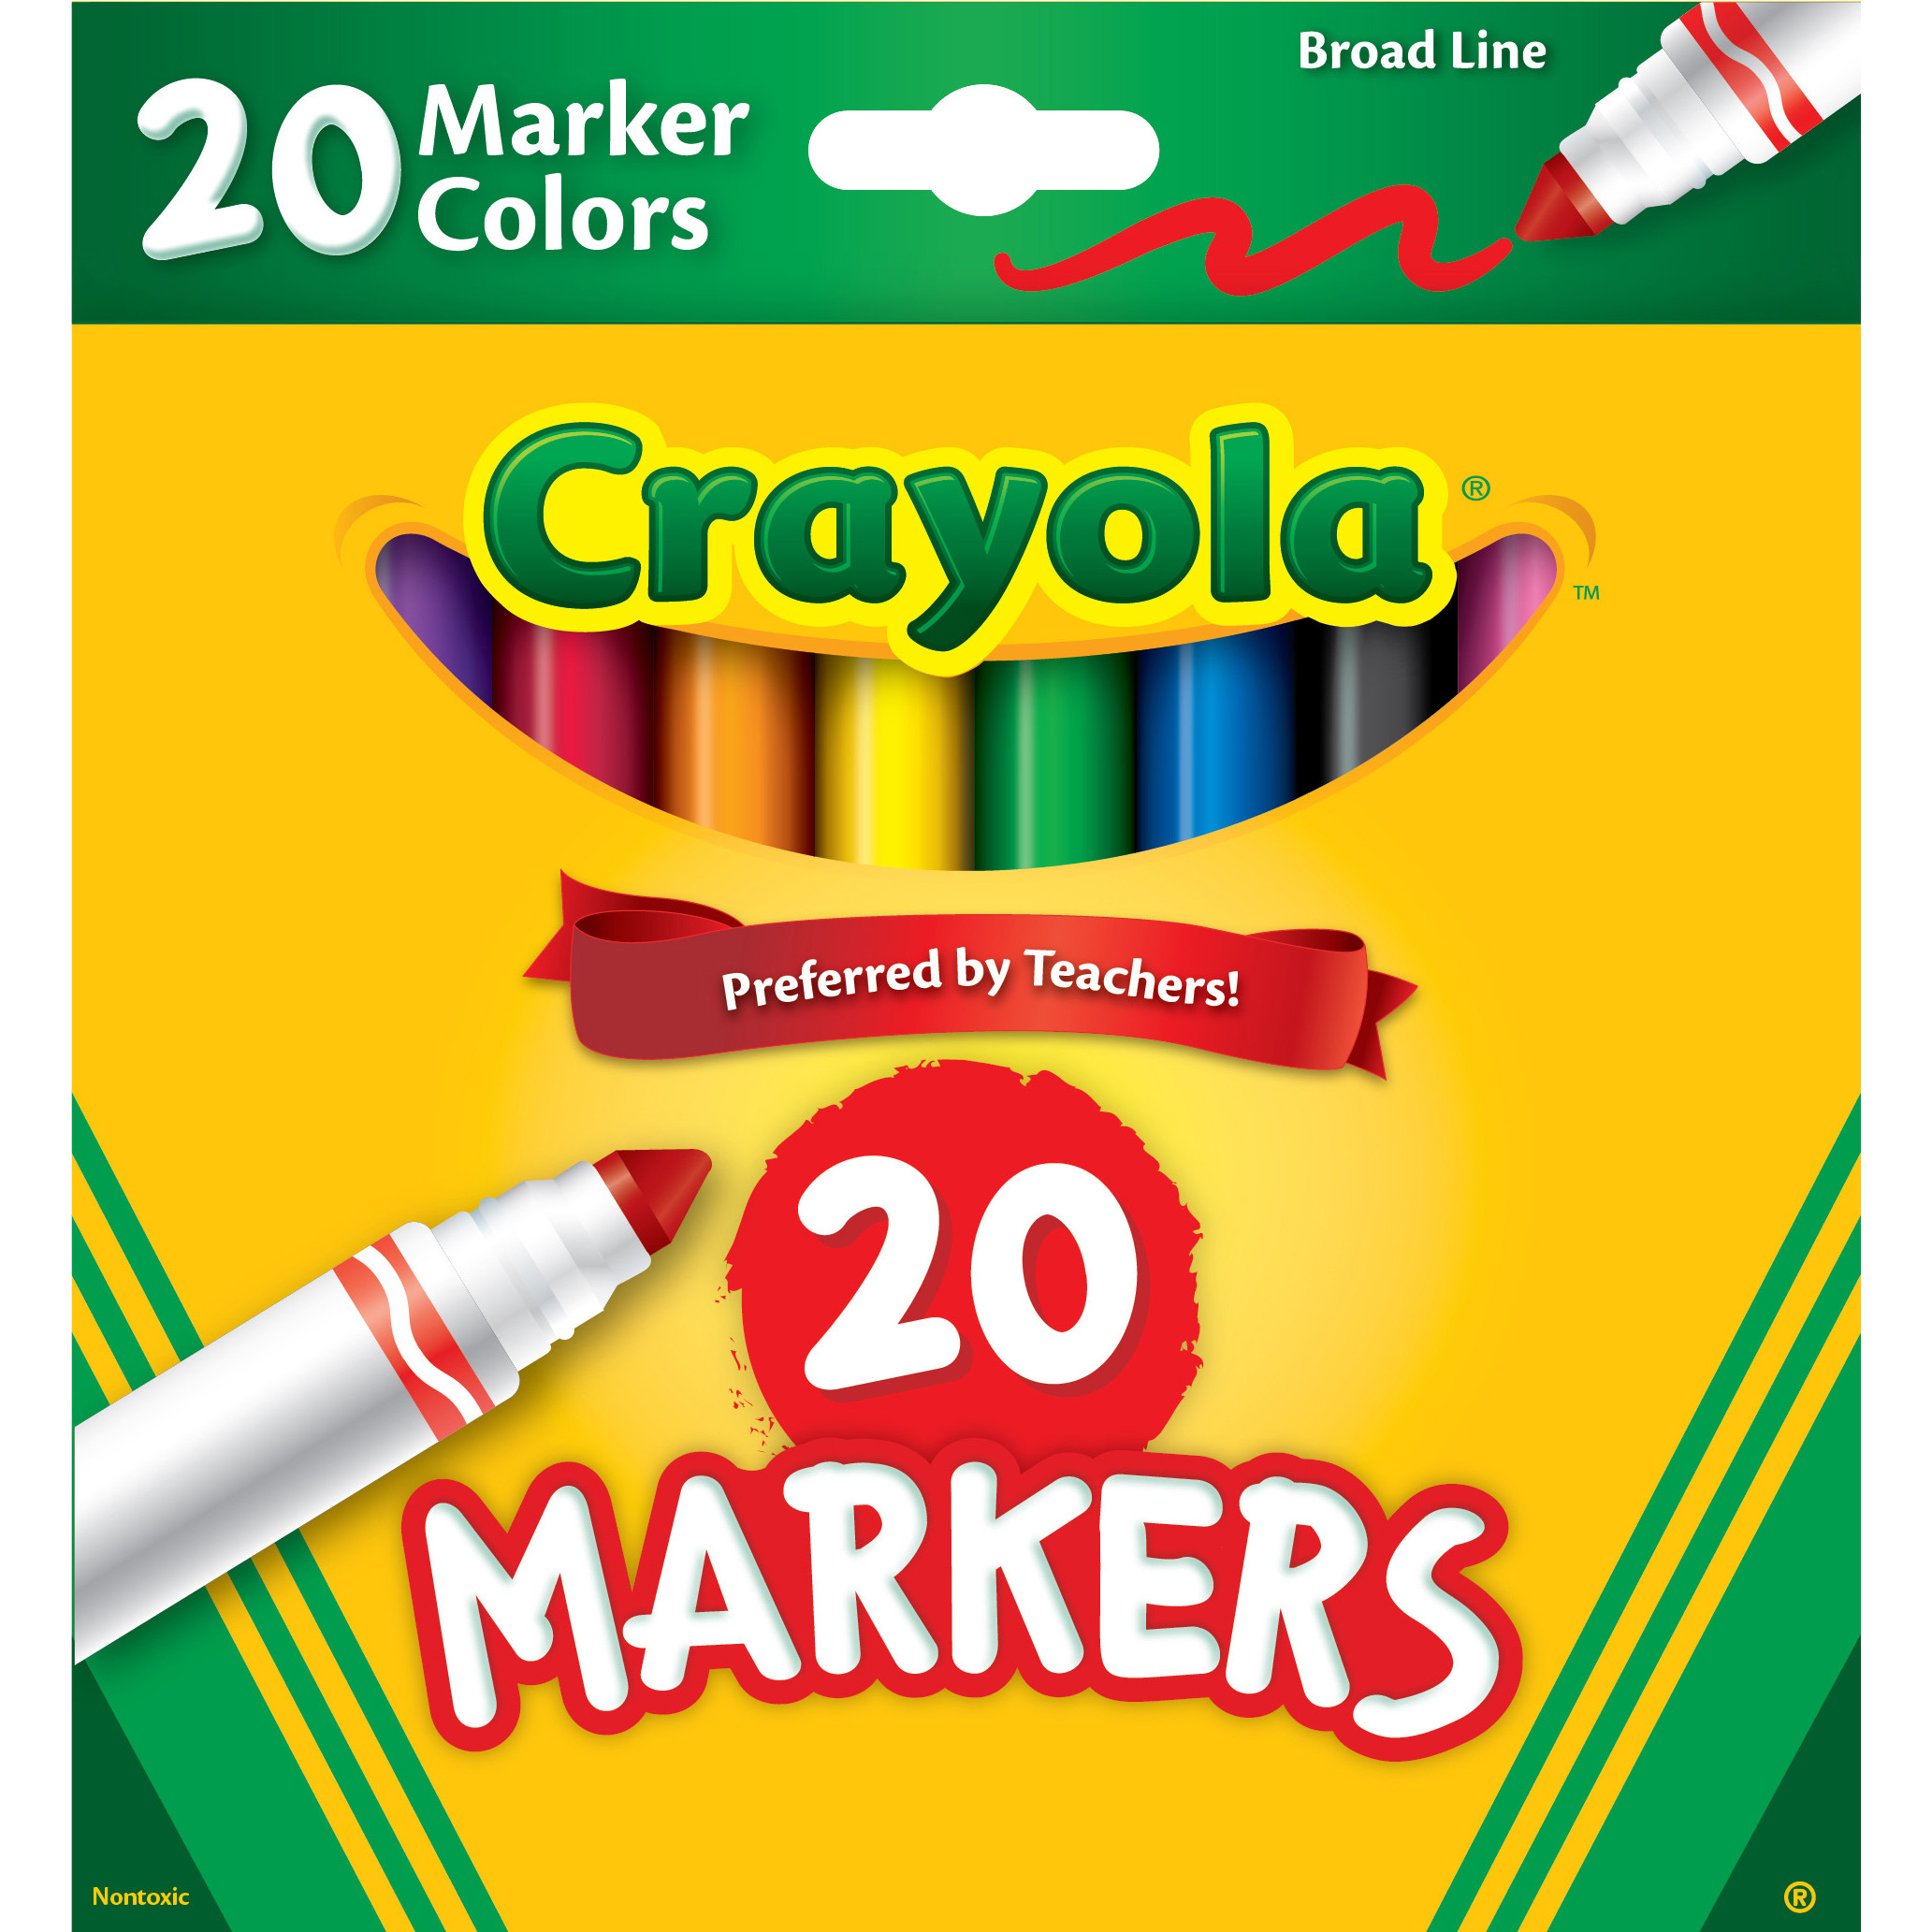 Crayola Broad Line Markers, 20 Ct, School Supplies, Easter Basket Stuffers, Classic Colors, Child - image 1 of 8